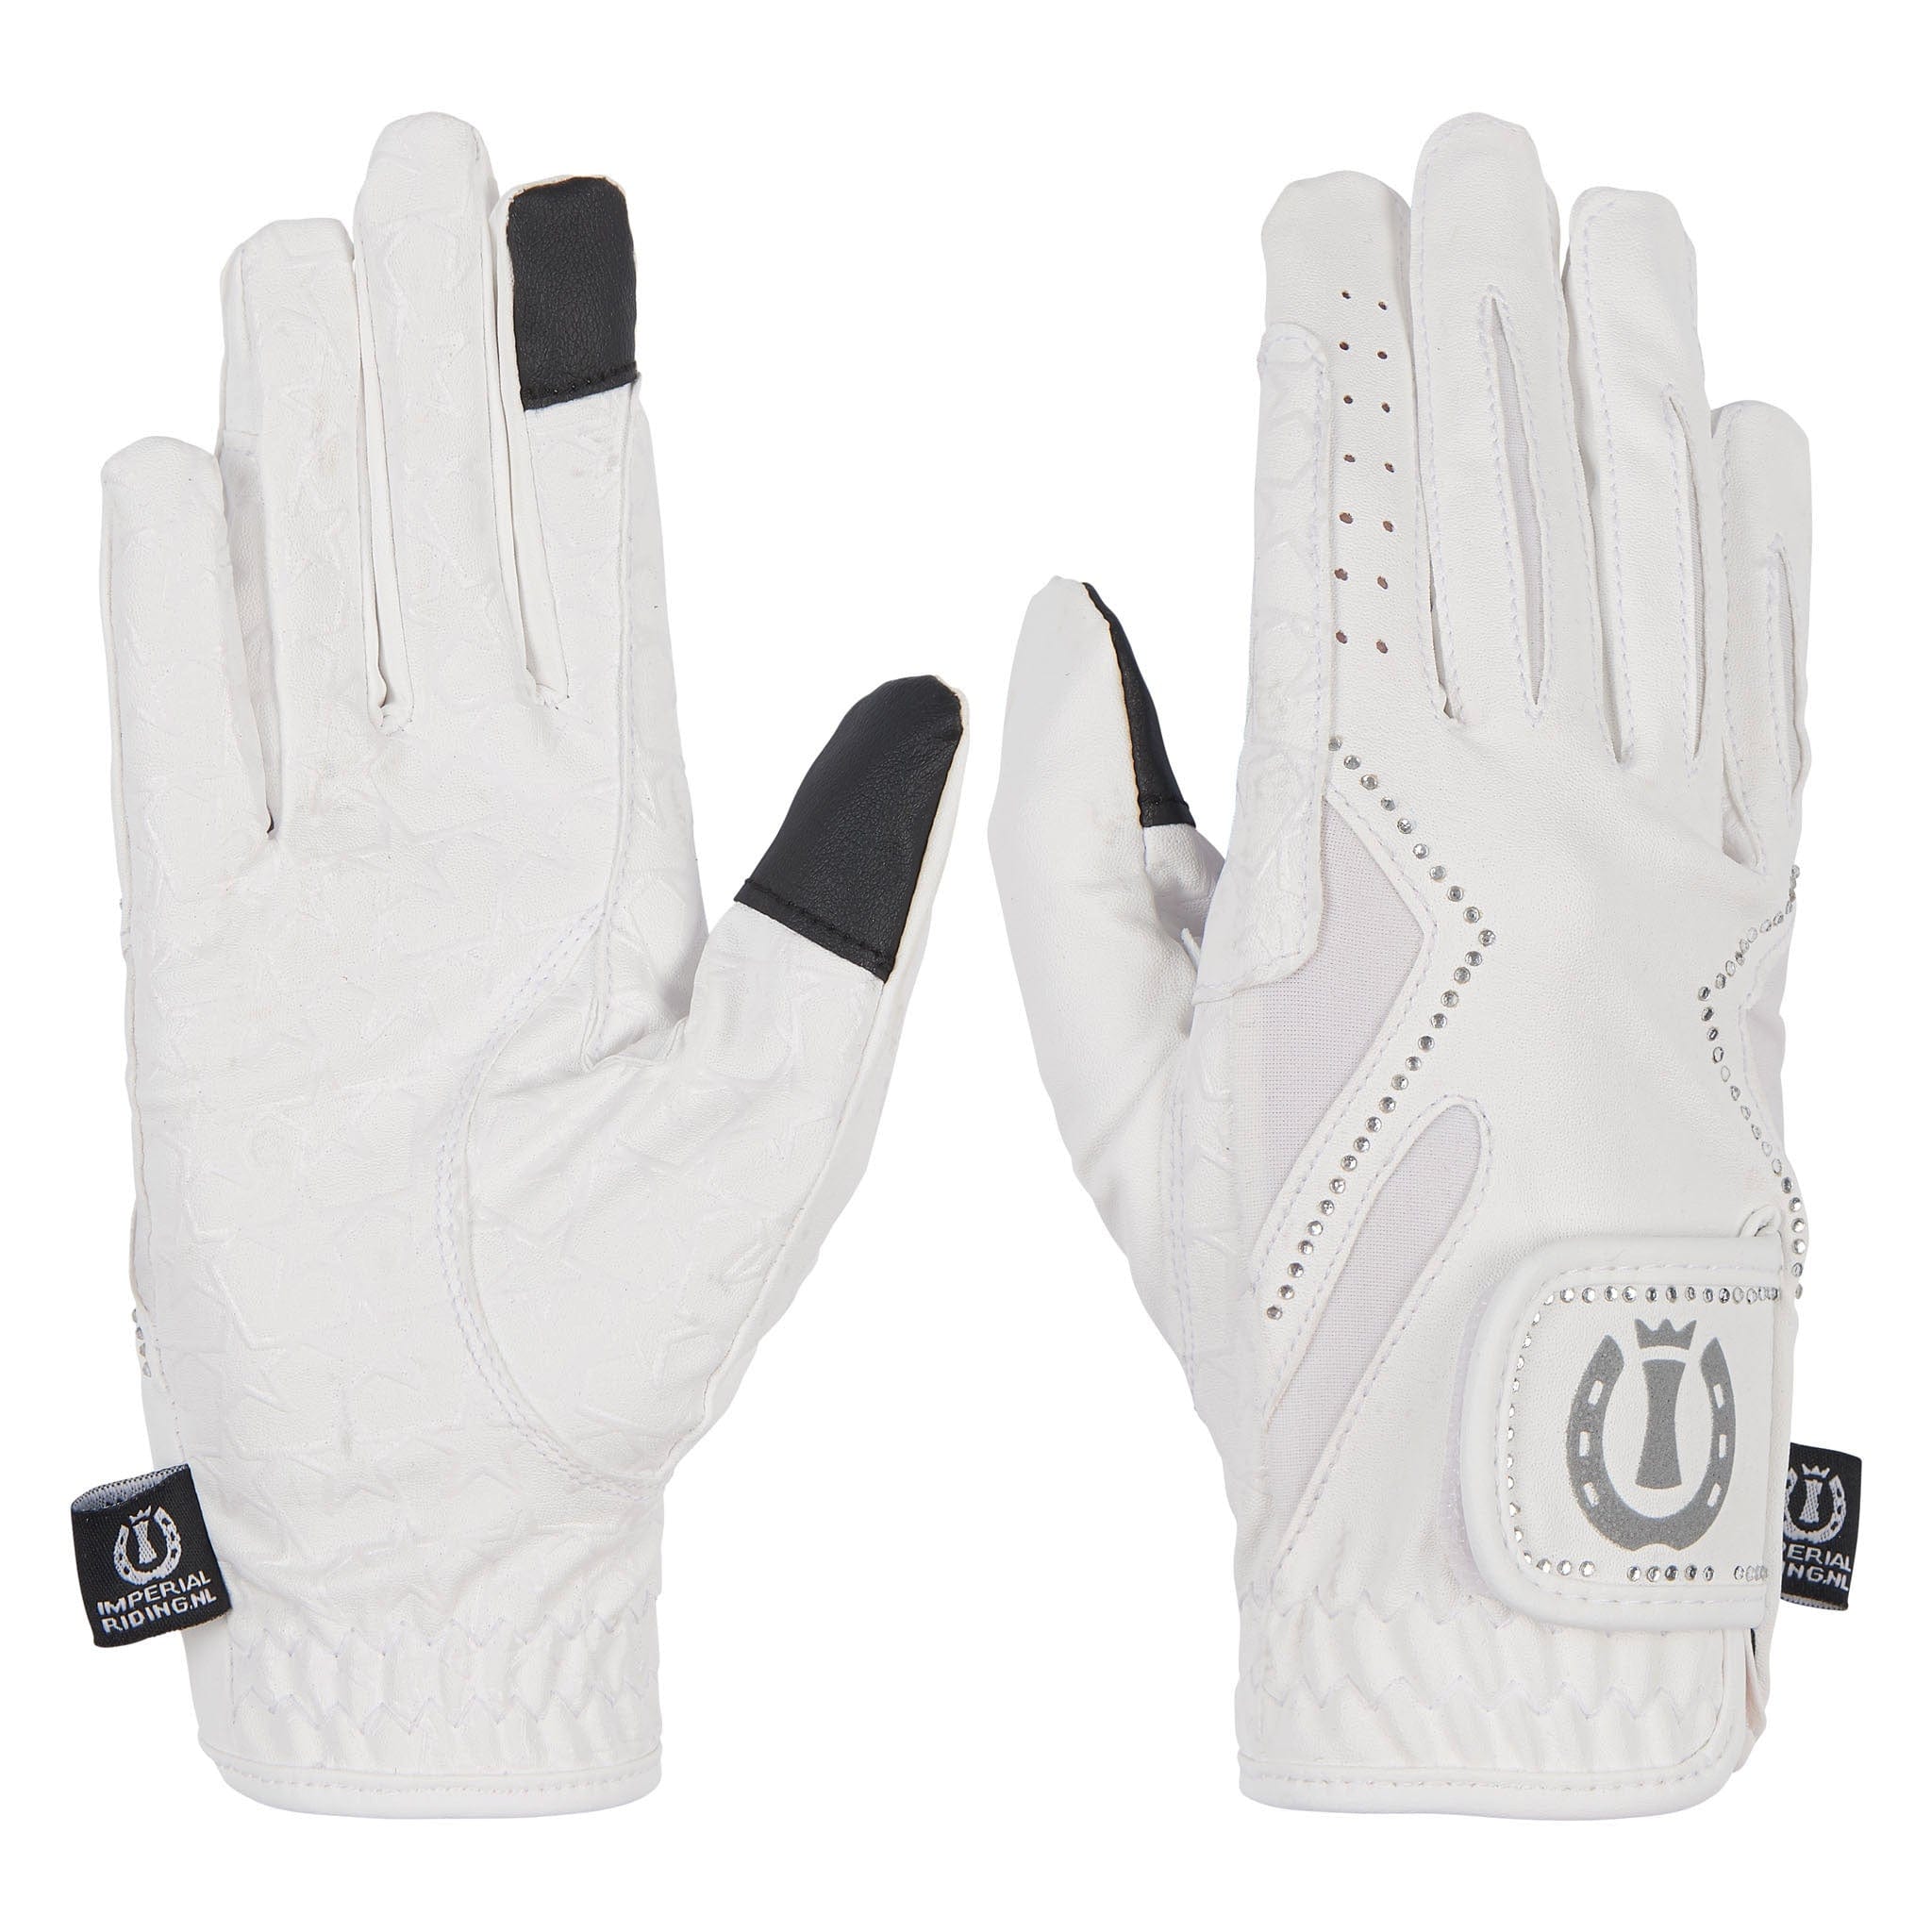 Imperial Riding Whatever Competition Riding Gloves KL50318001 White Palm and Back Hand